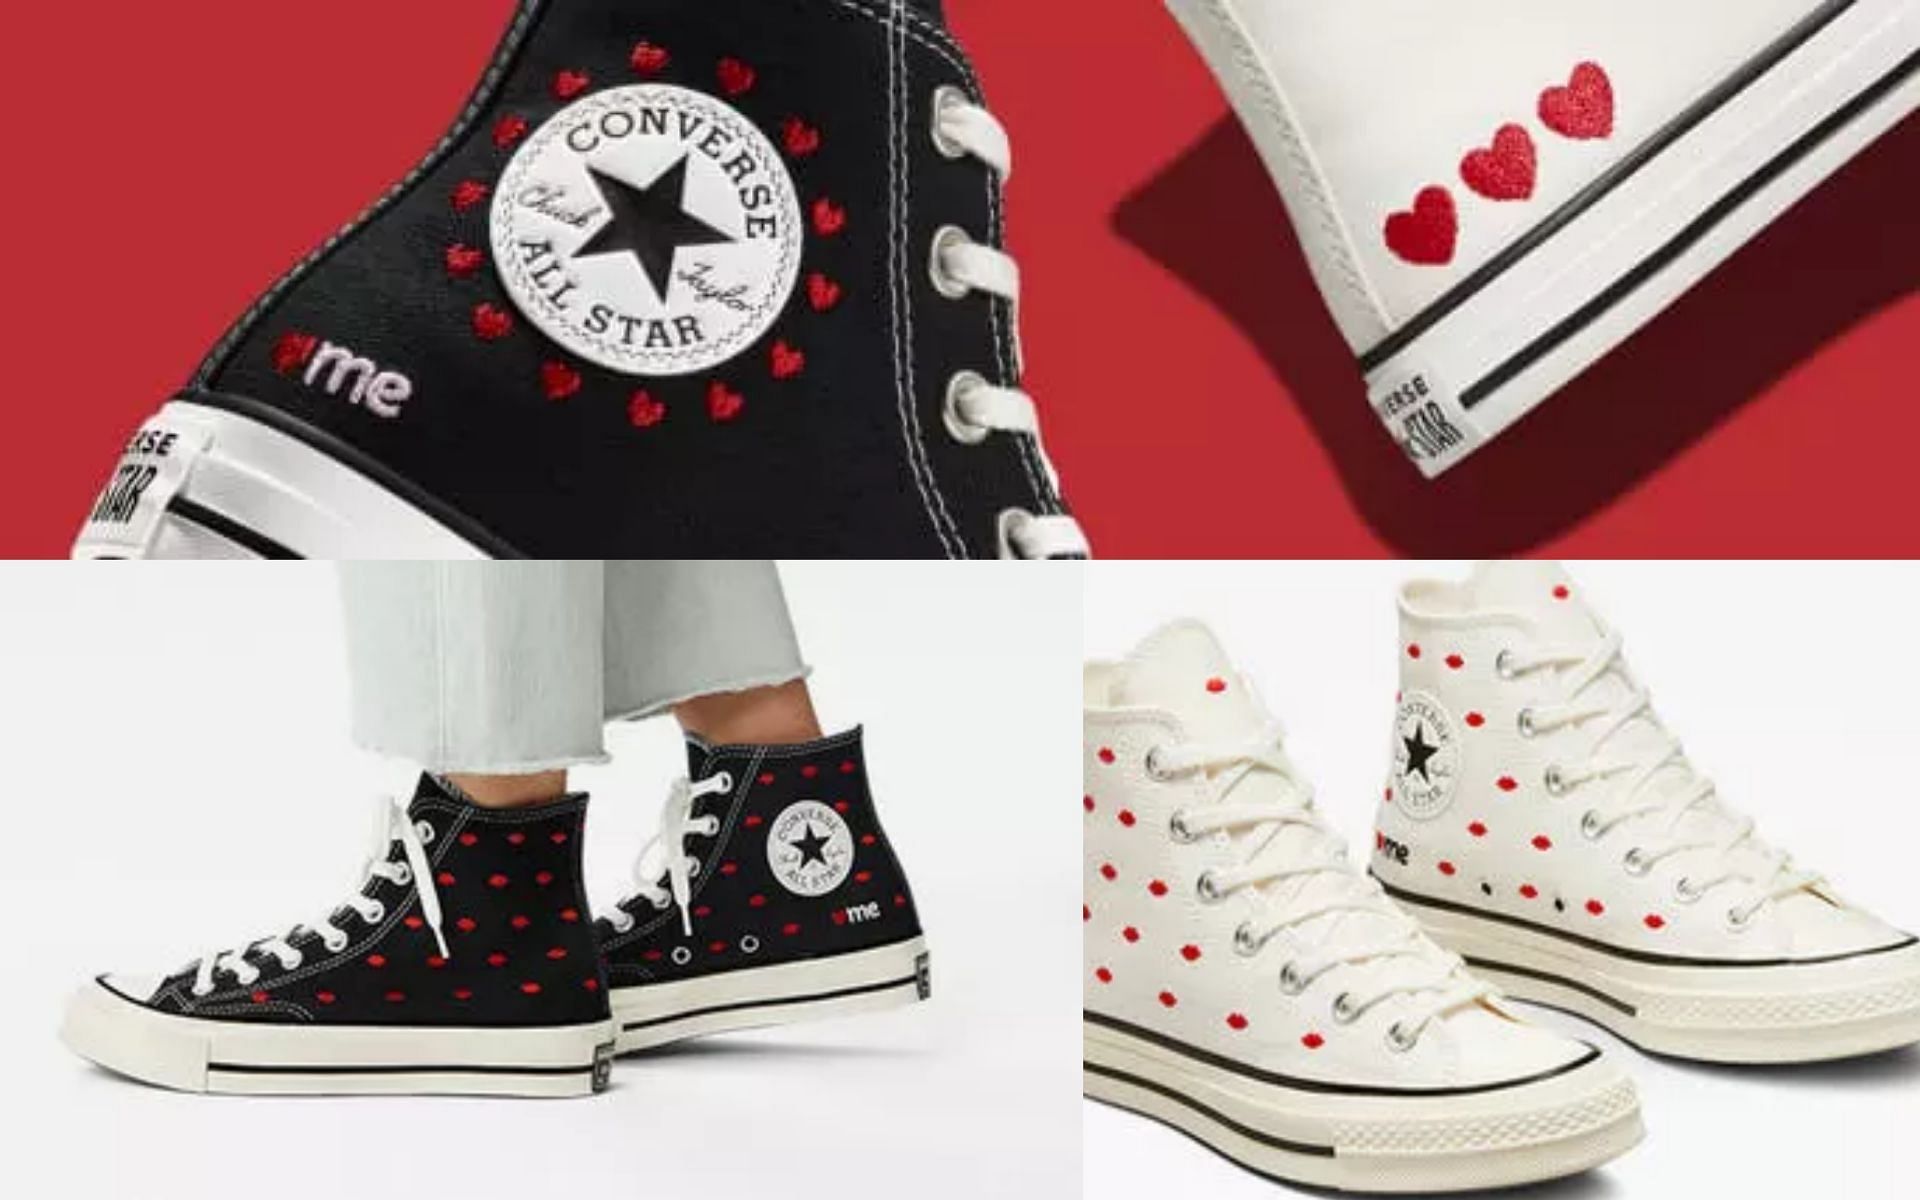 Converse Valentine's Day Collection Where to buy, price, and more